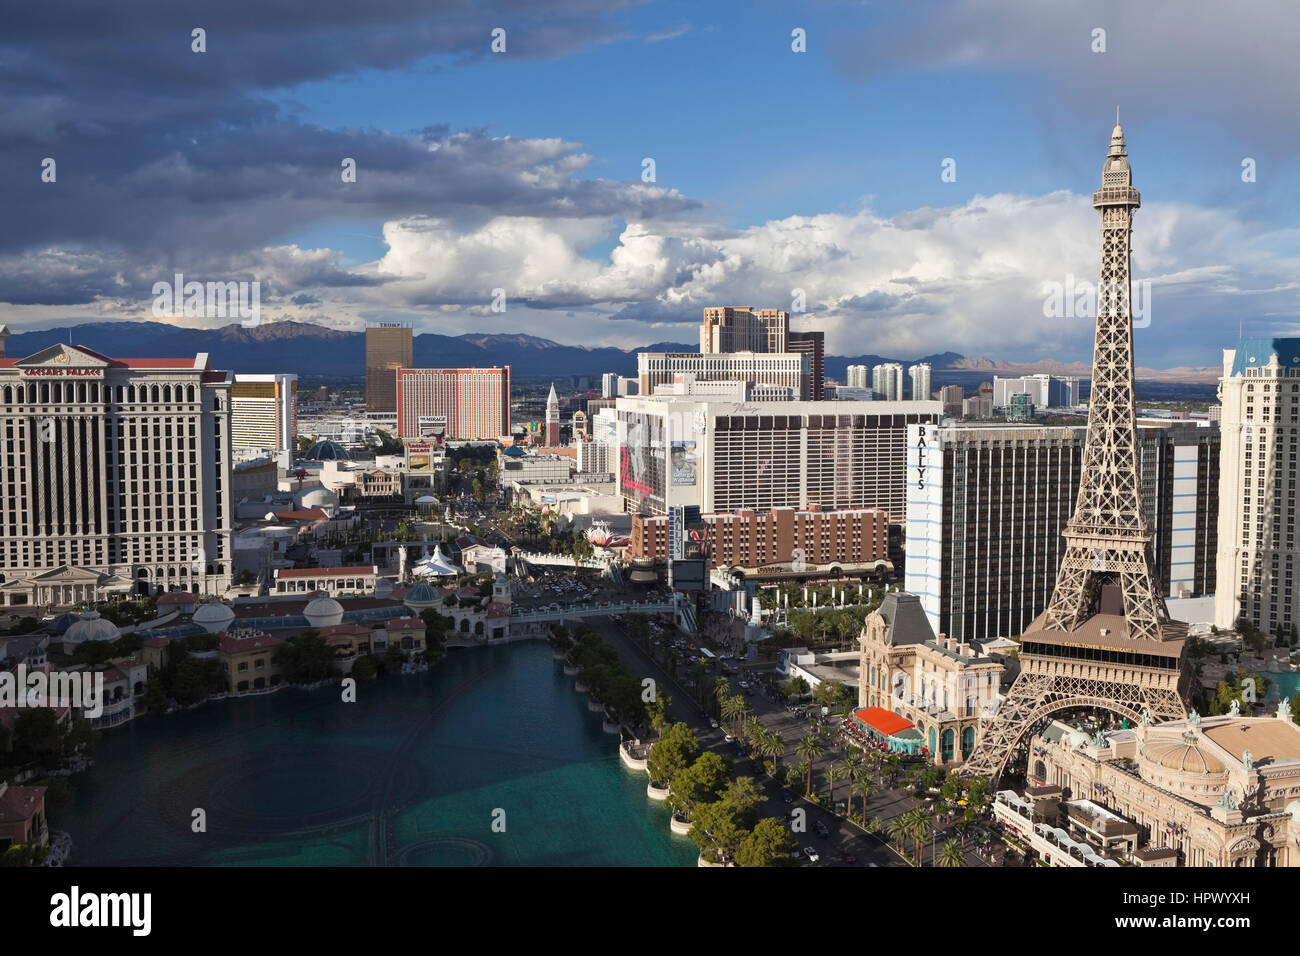 Las Vegas, Nevada, USA - October 6, 2011:  Afternoon storms above the Bellagio fountains on the Las Vegas strip. Stock Photo